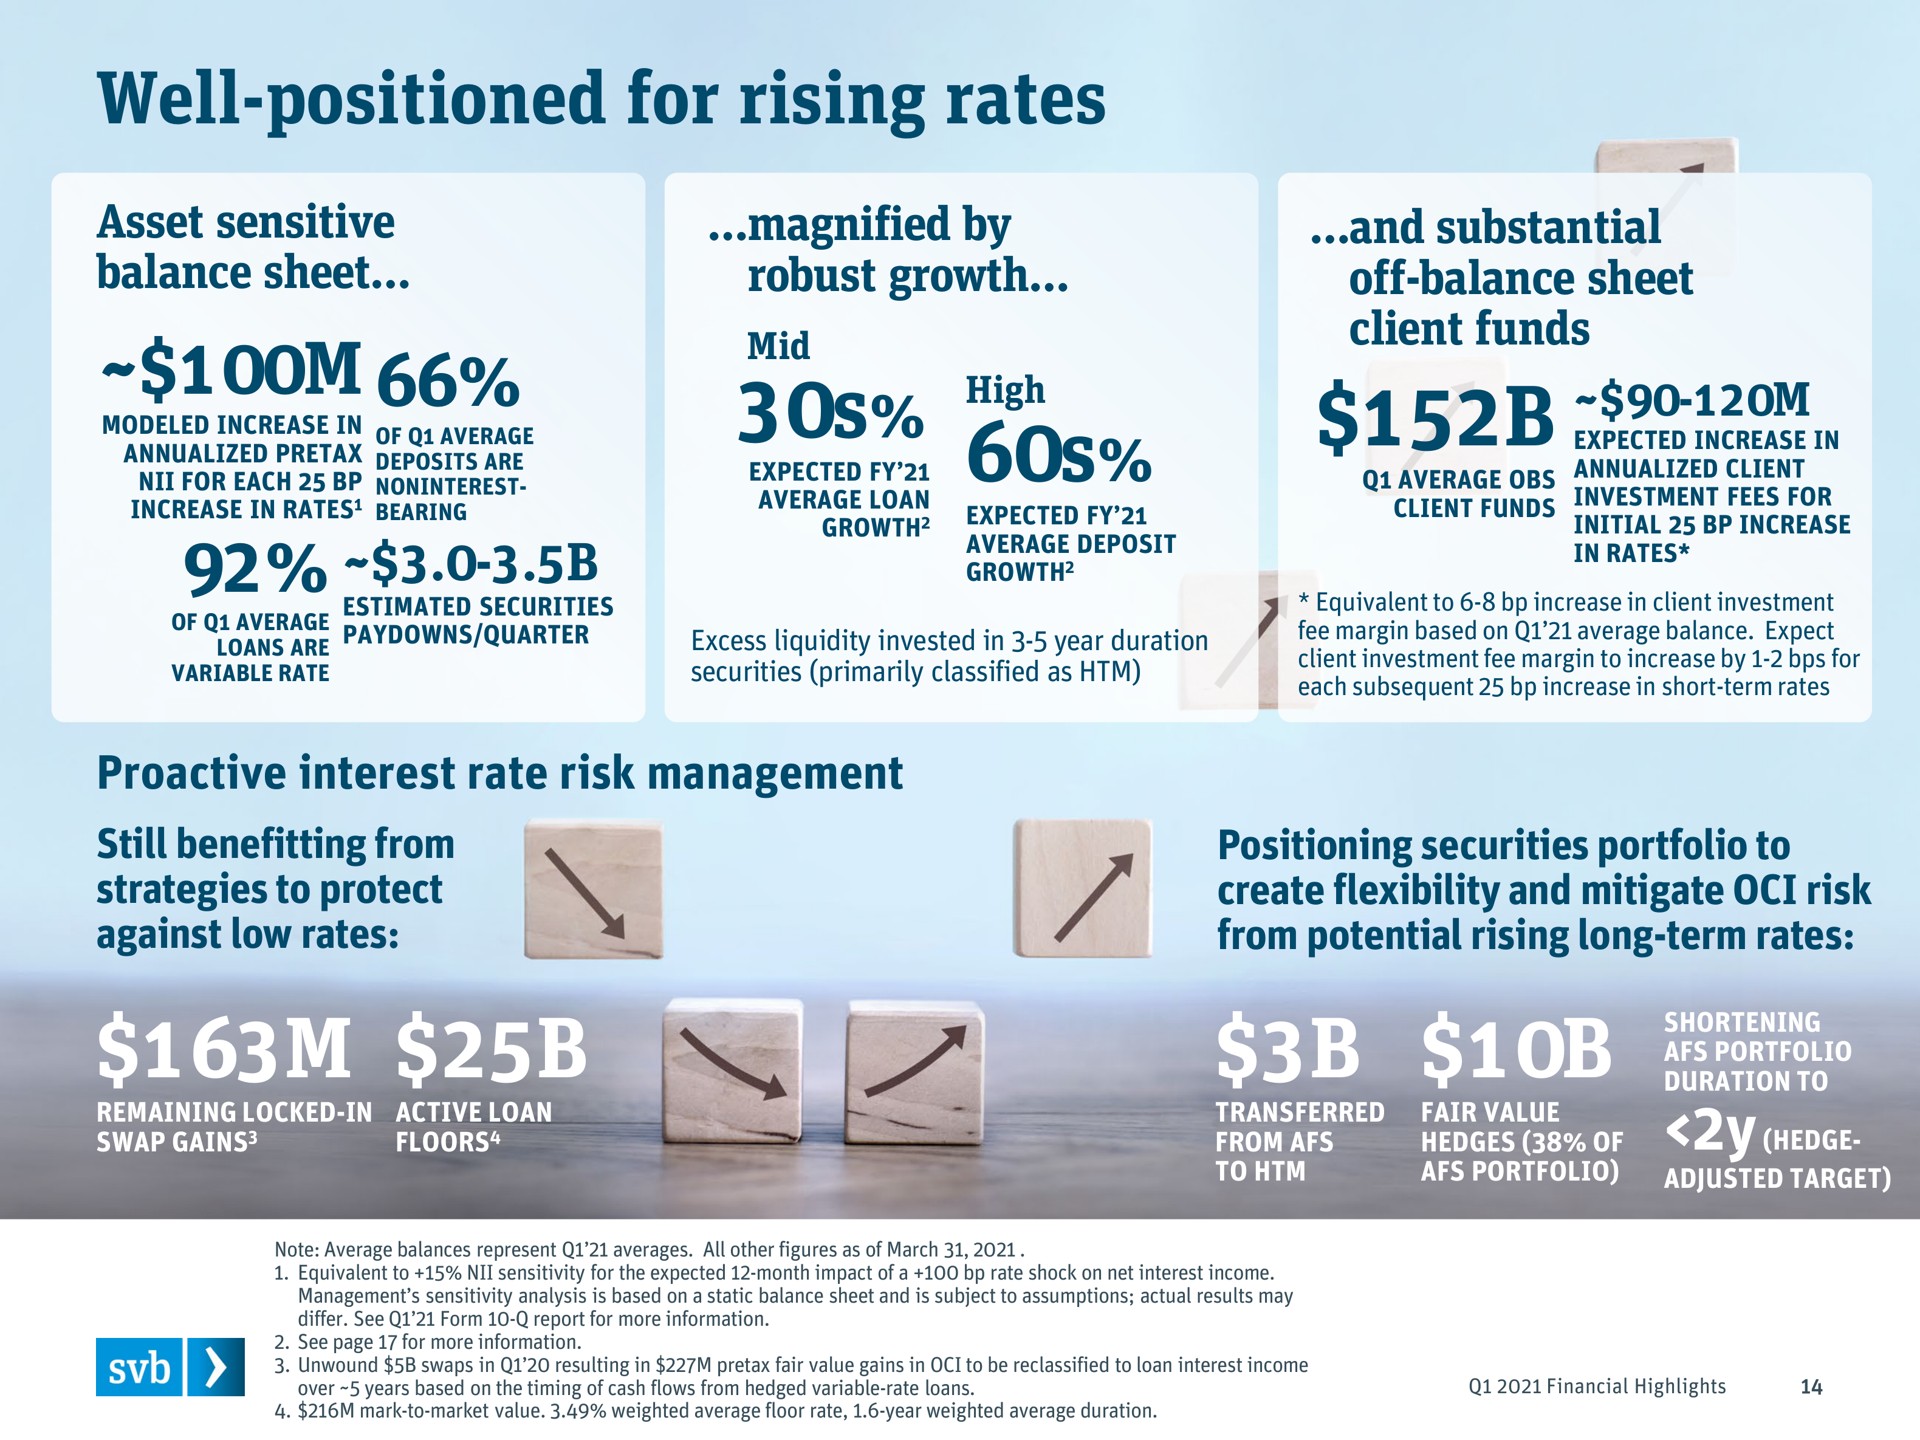 well positioned for rising rates asset sensitive balance sheet magnified by robust growth and substantial off balance sheet client funds interest rate risk management | Silicon Valley Bank